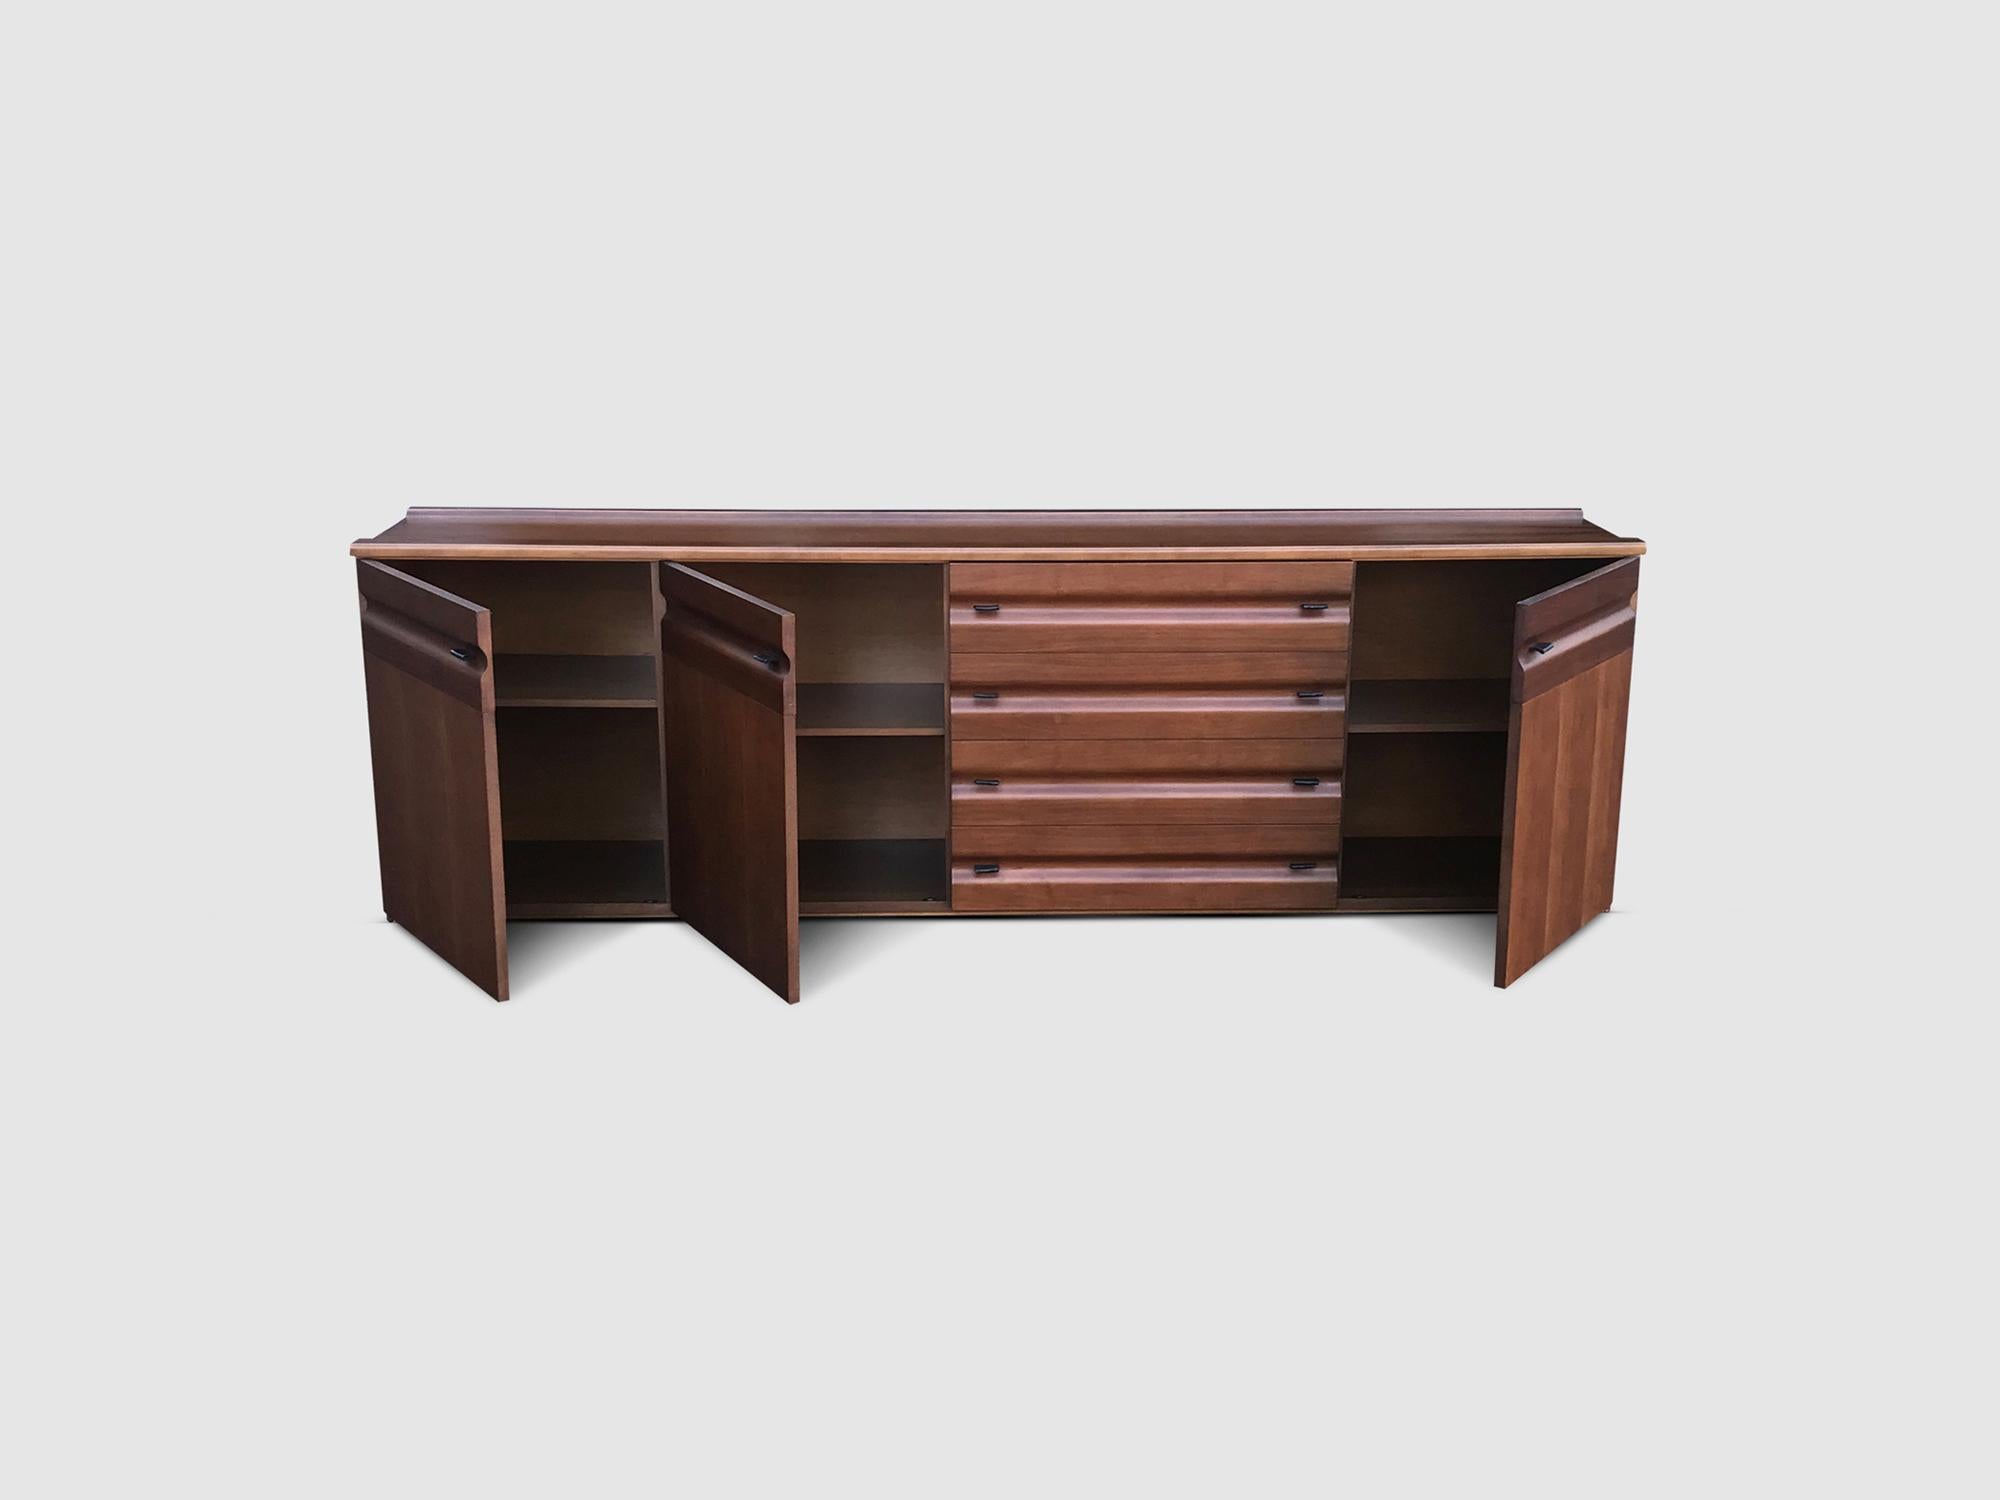 Impressive Sculpted Walnut and Leather Credenza Gavina, Italy, 1970s For Sale 4